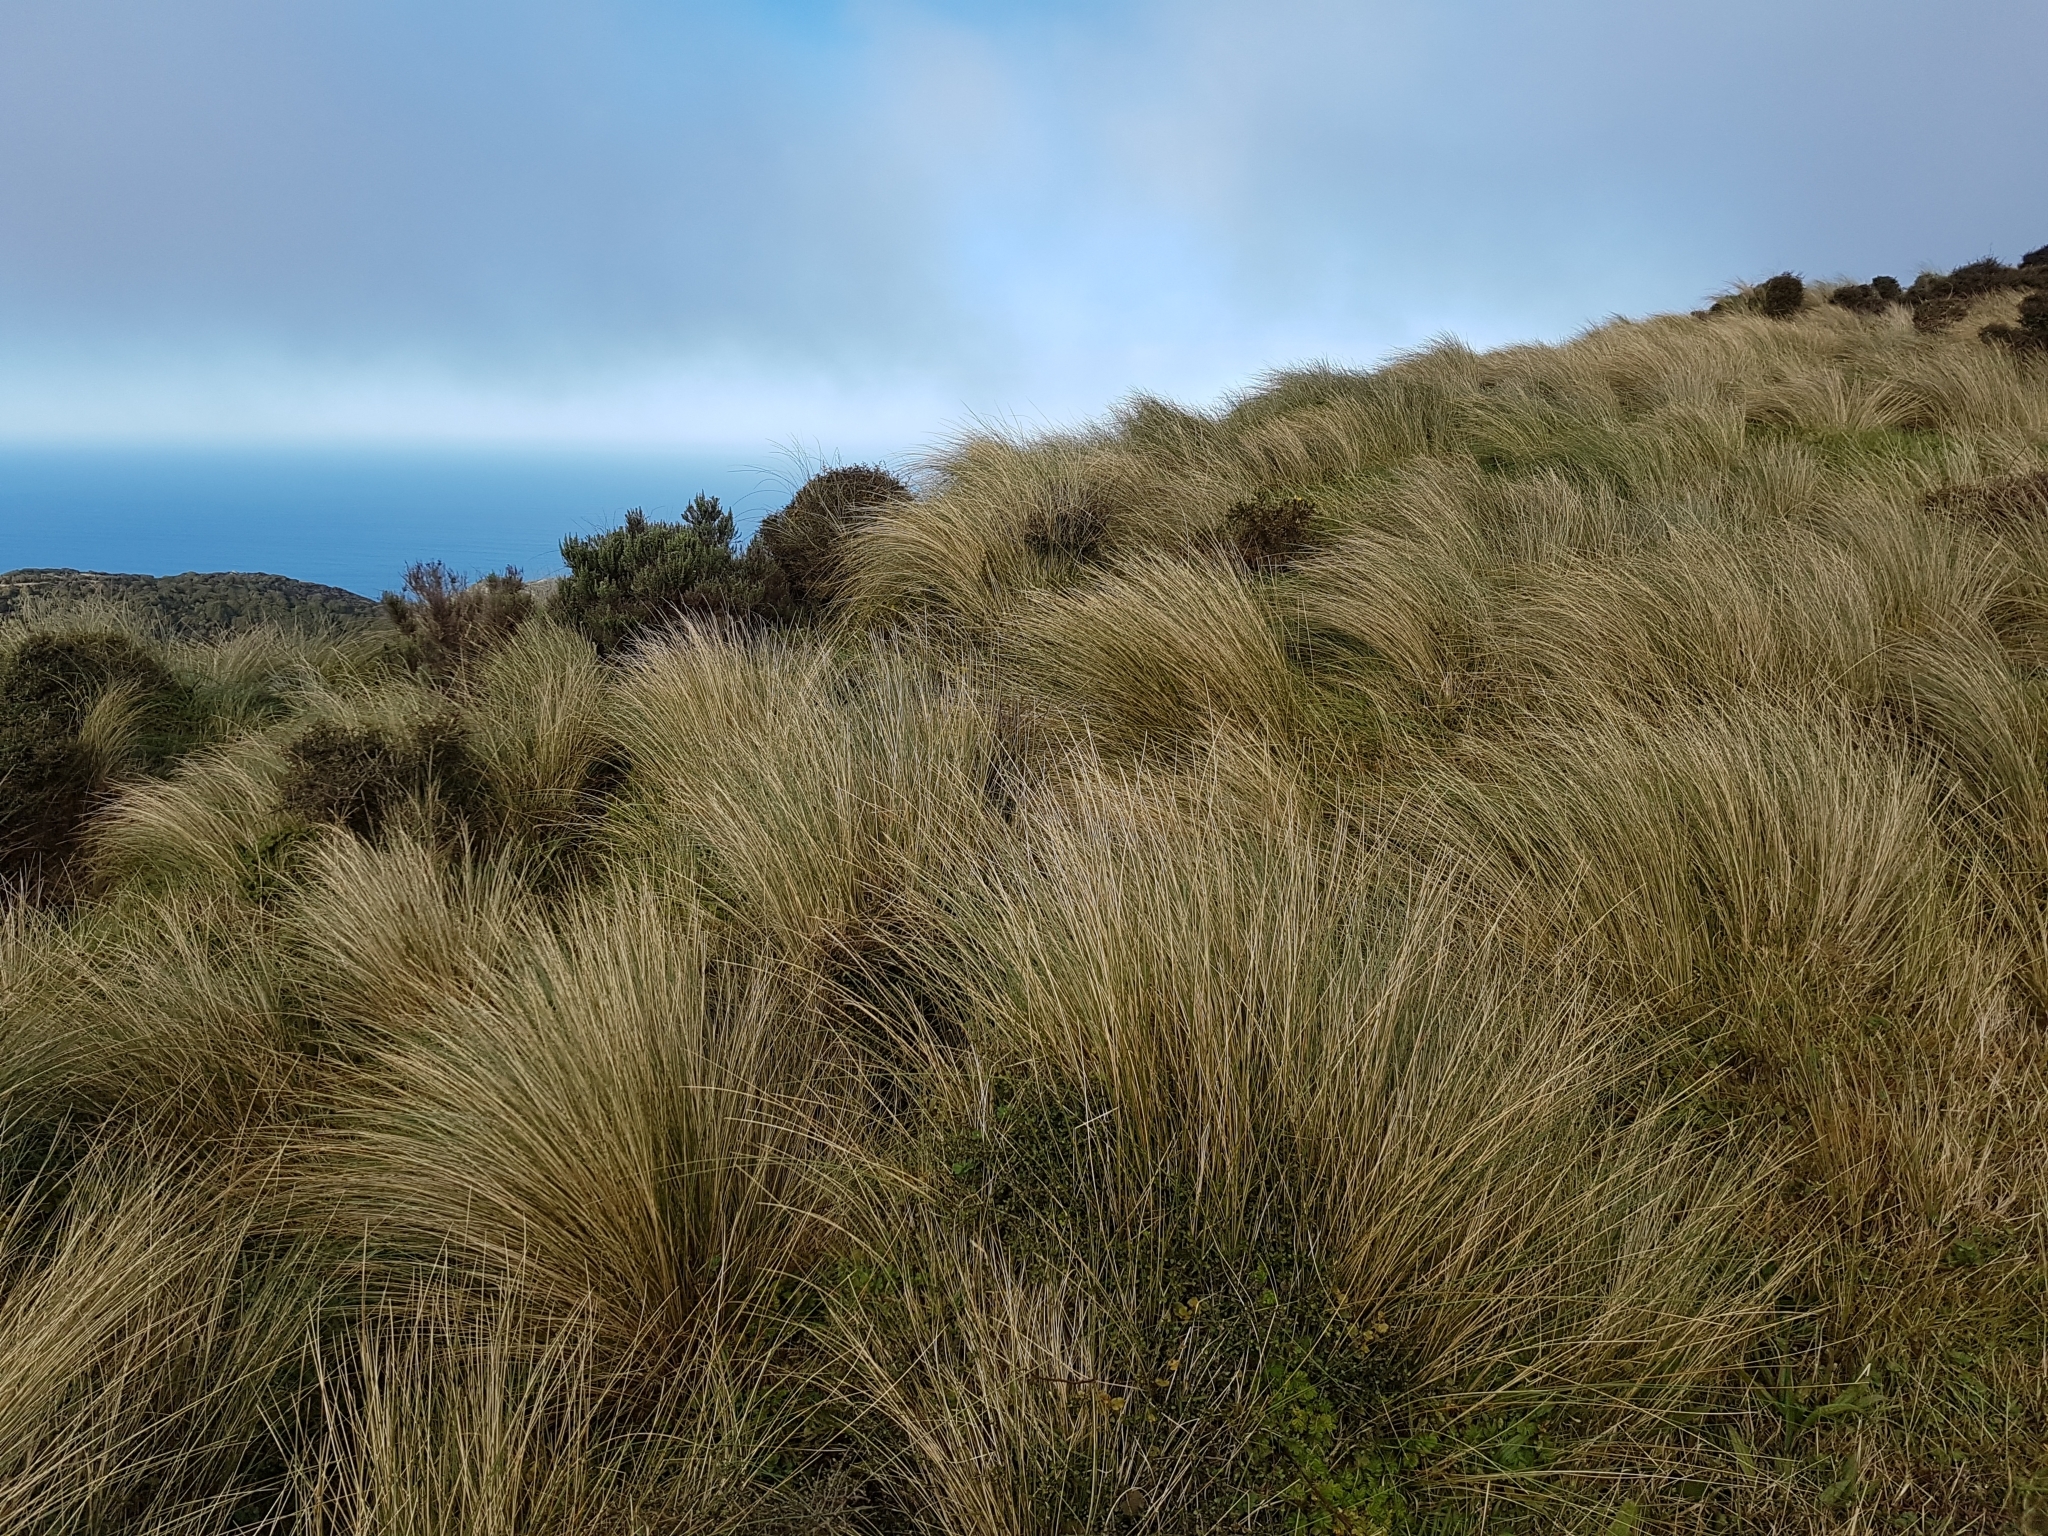 Photograph of bunches of sliver tussock growing on a hill slope.